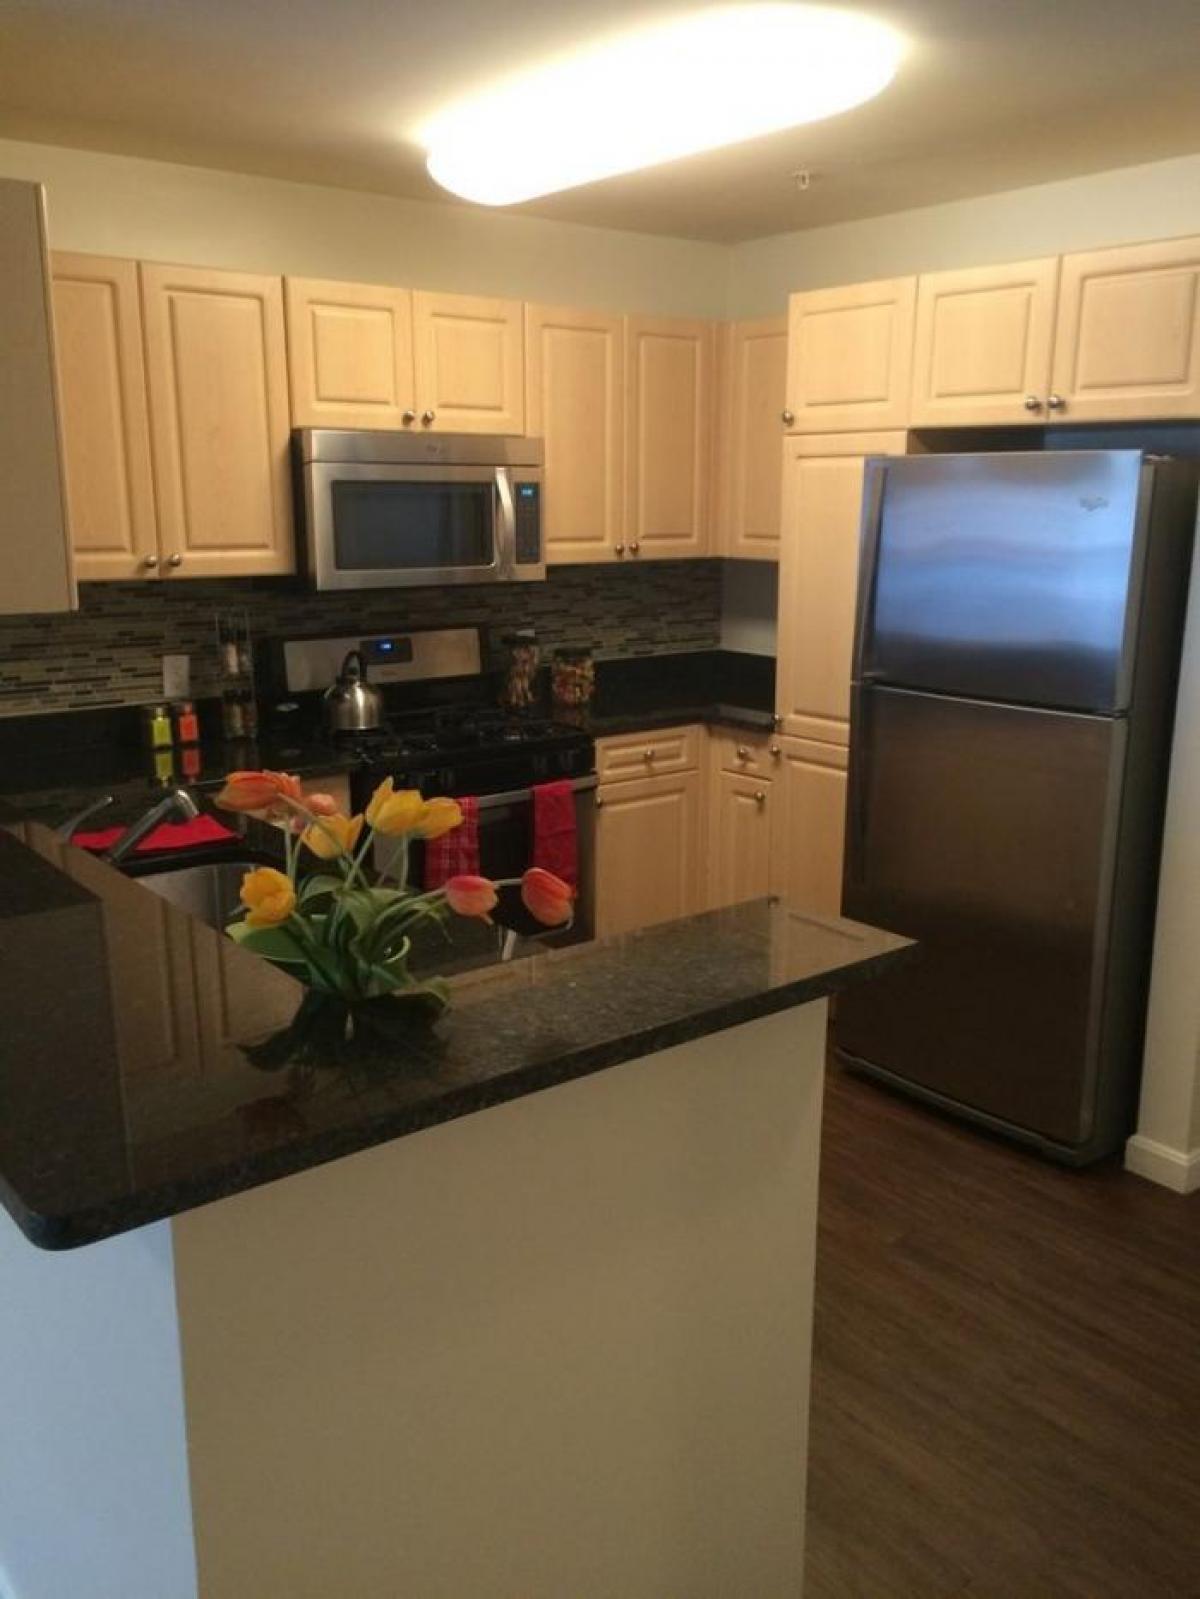 Picture of Apartment For Rent in Woburn, Massachusetts, United States